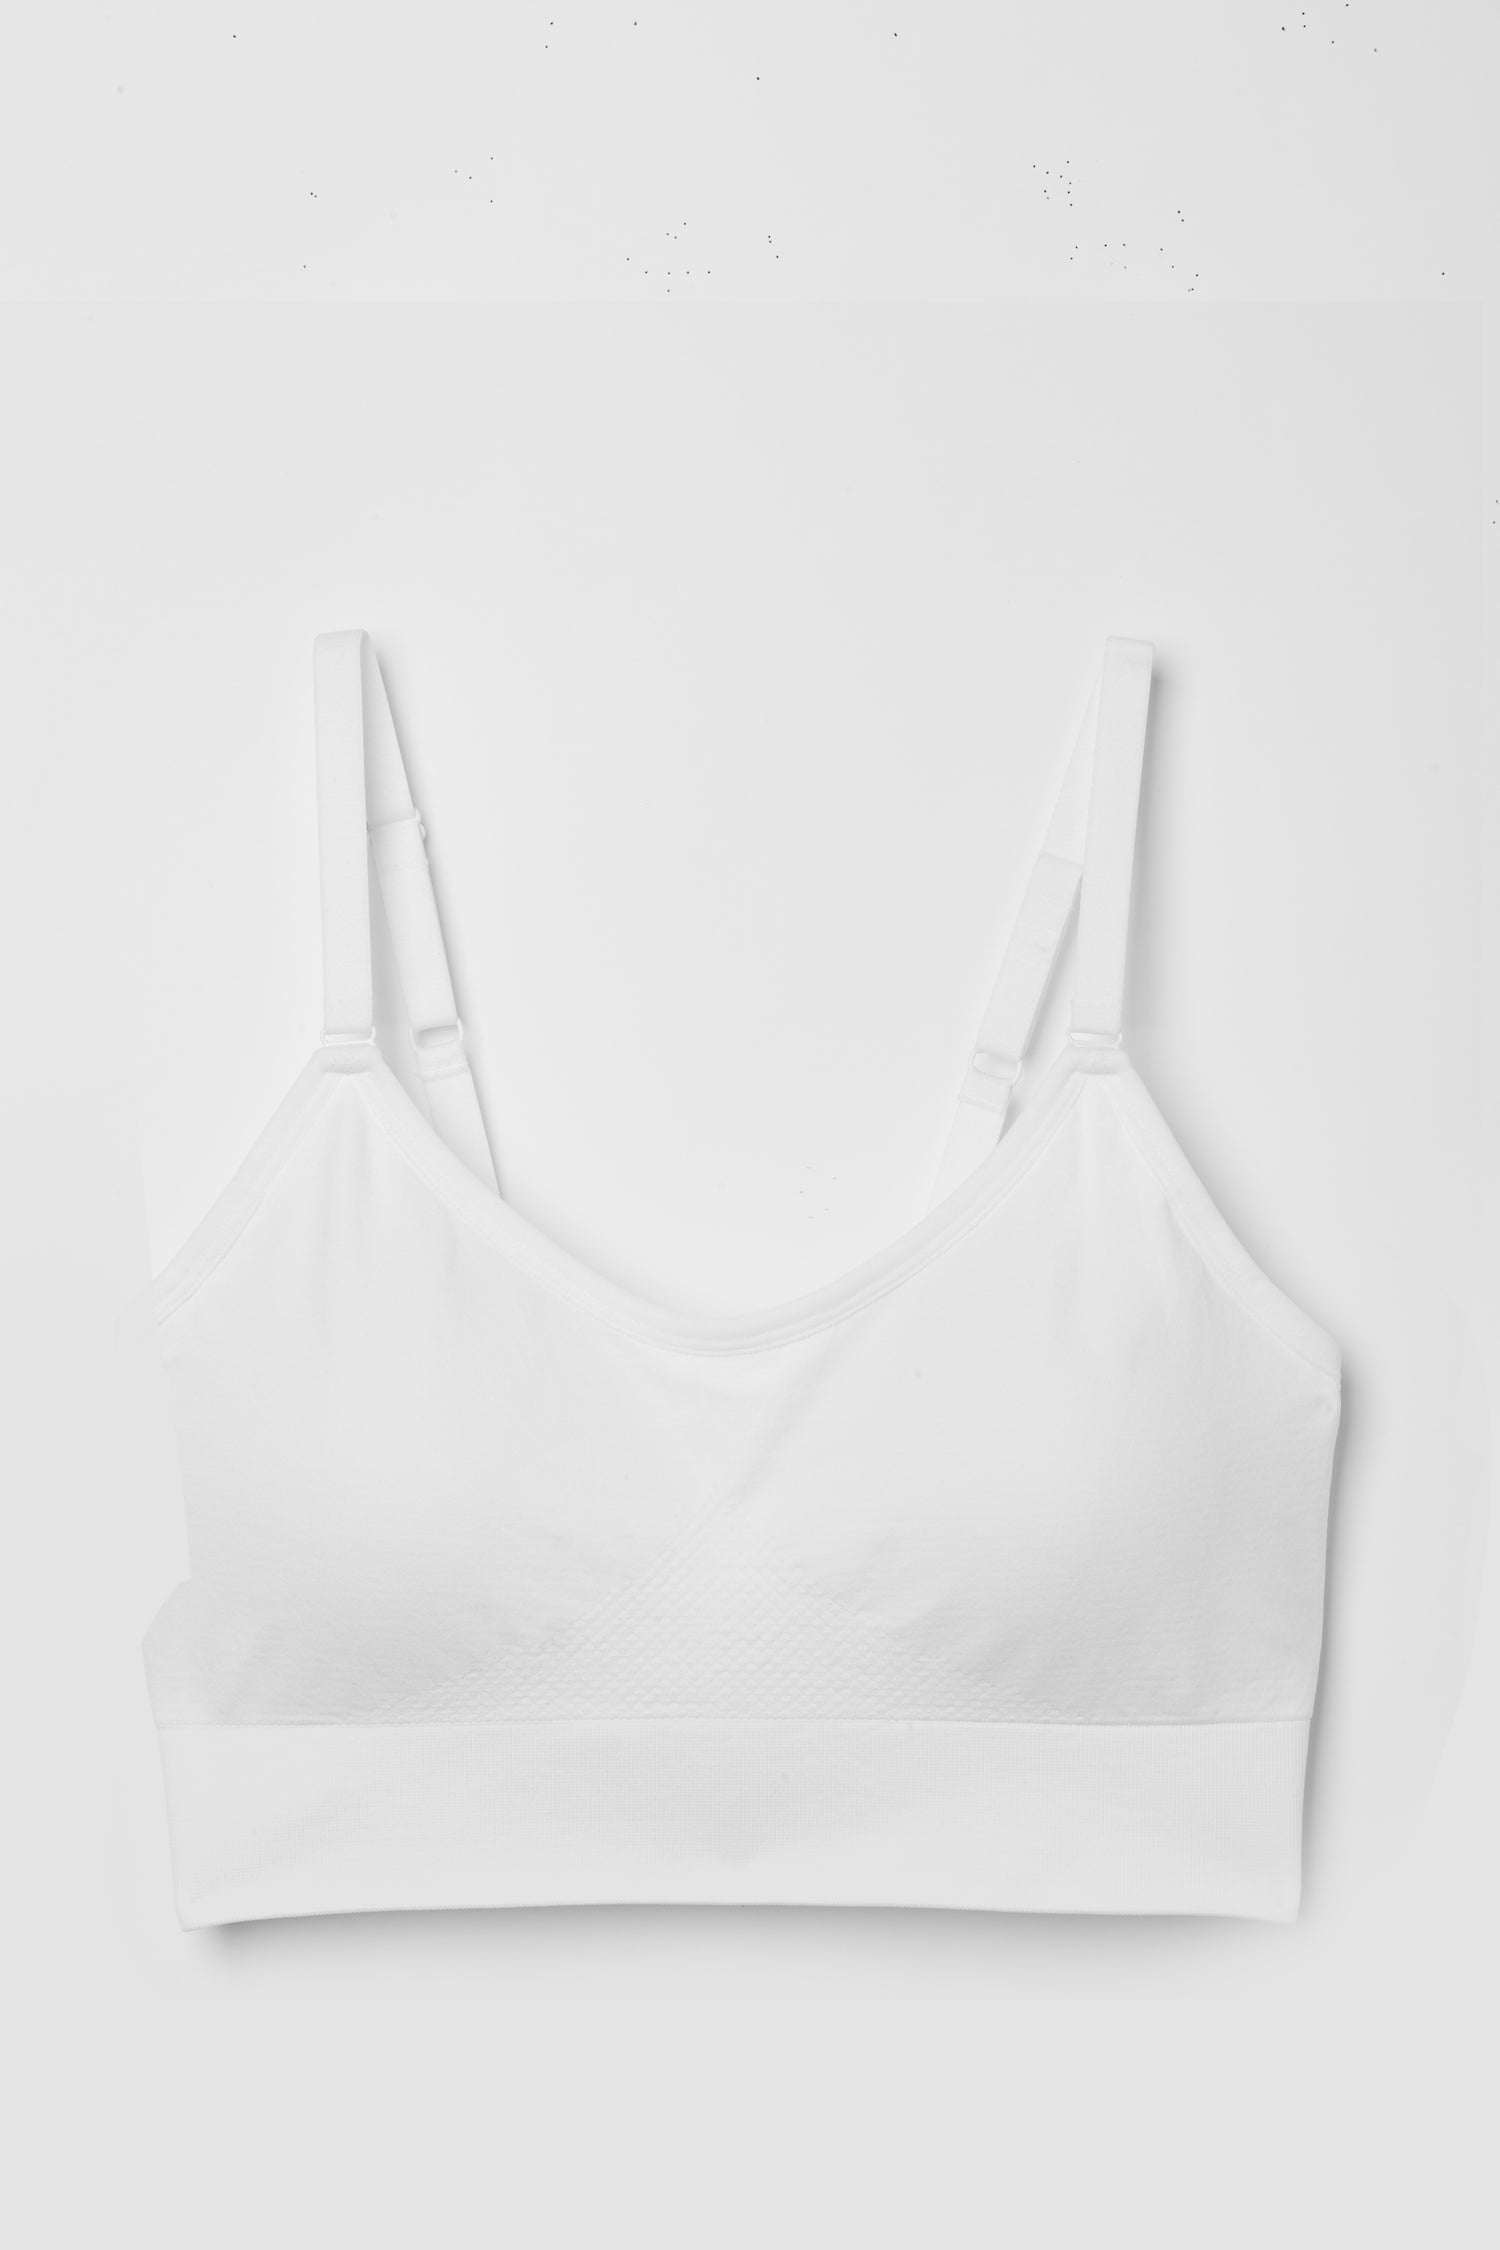 White Sport Bras for Women Triangle Bralette for Wome Ribbed